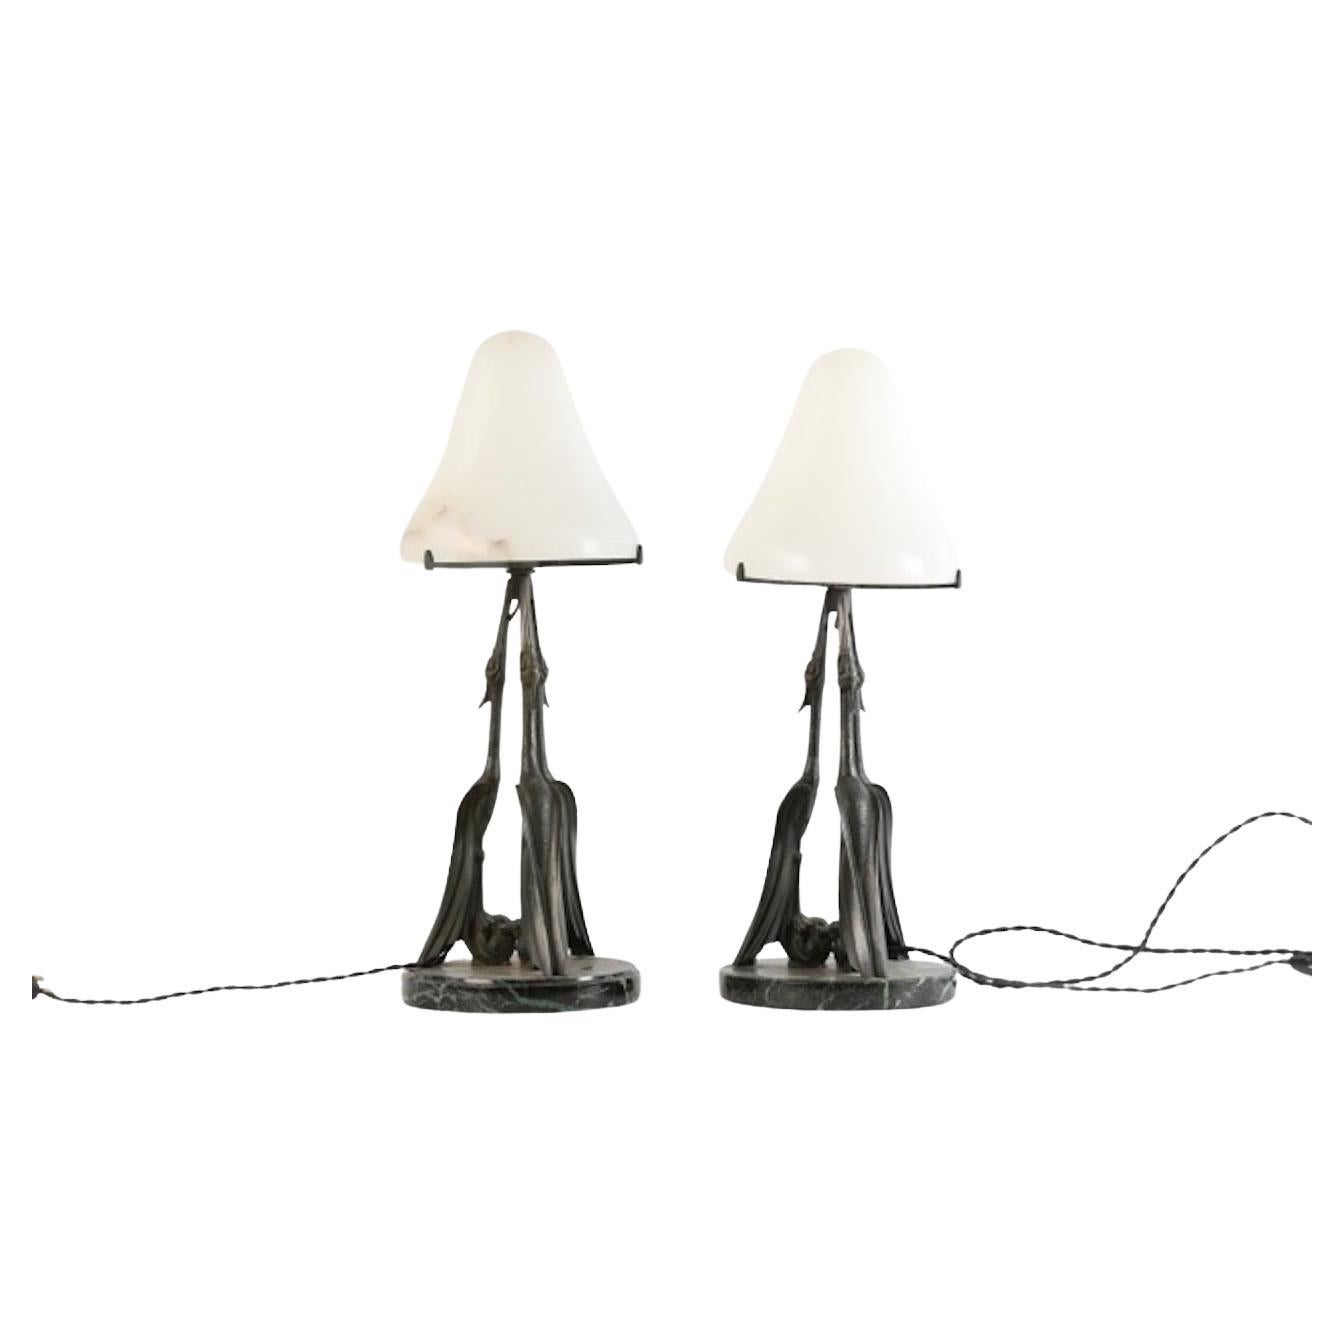 Pair of French Art Deco Table Lamps by Max Le Verrier, Paris, Signed For Sale